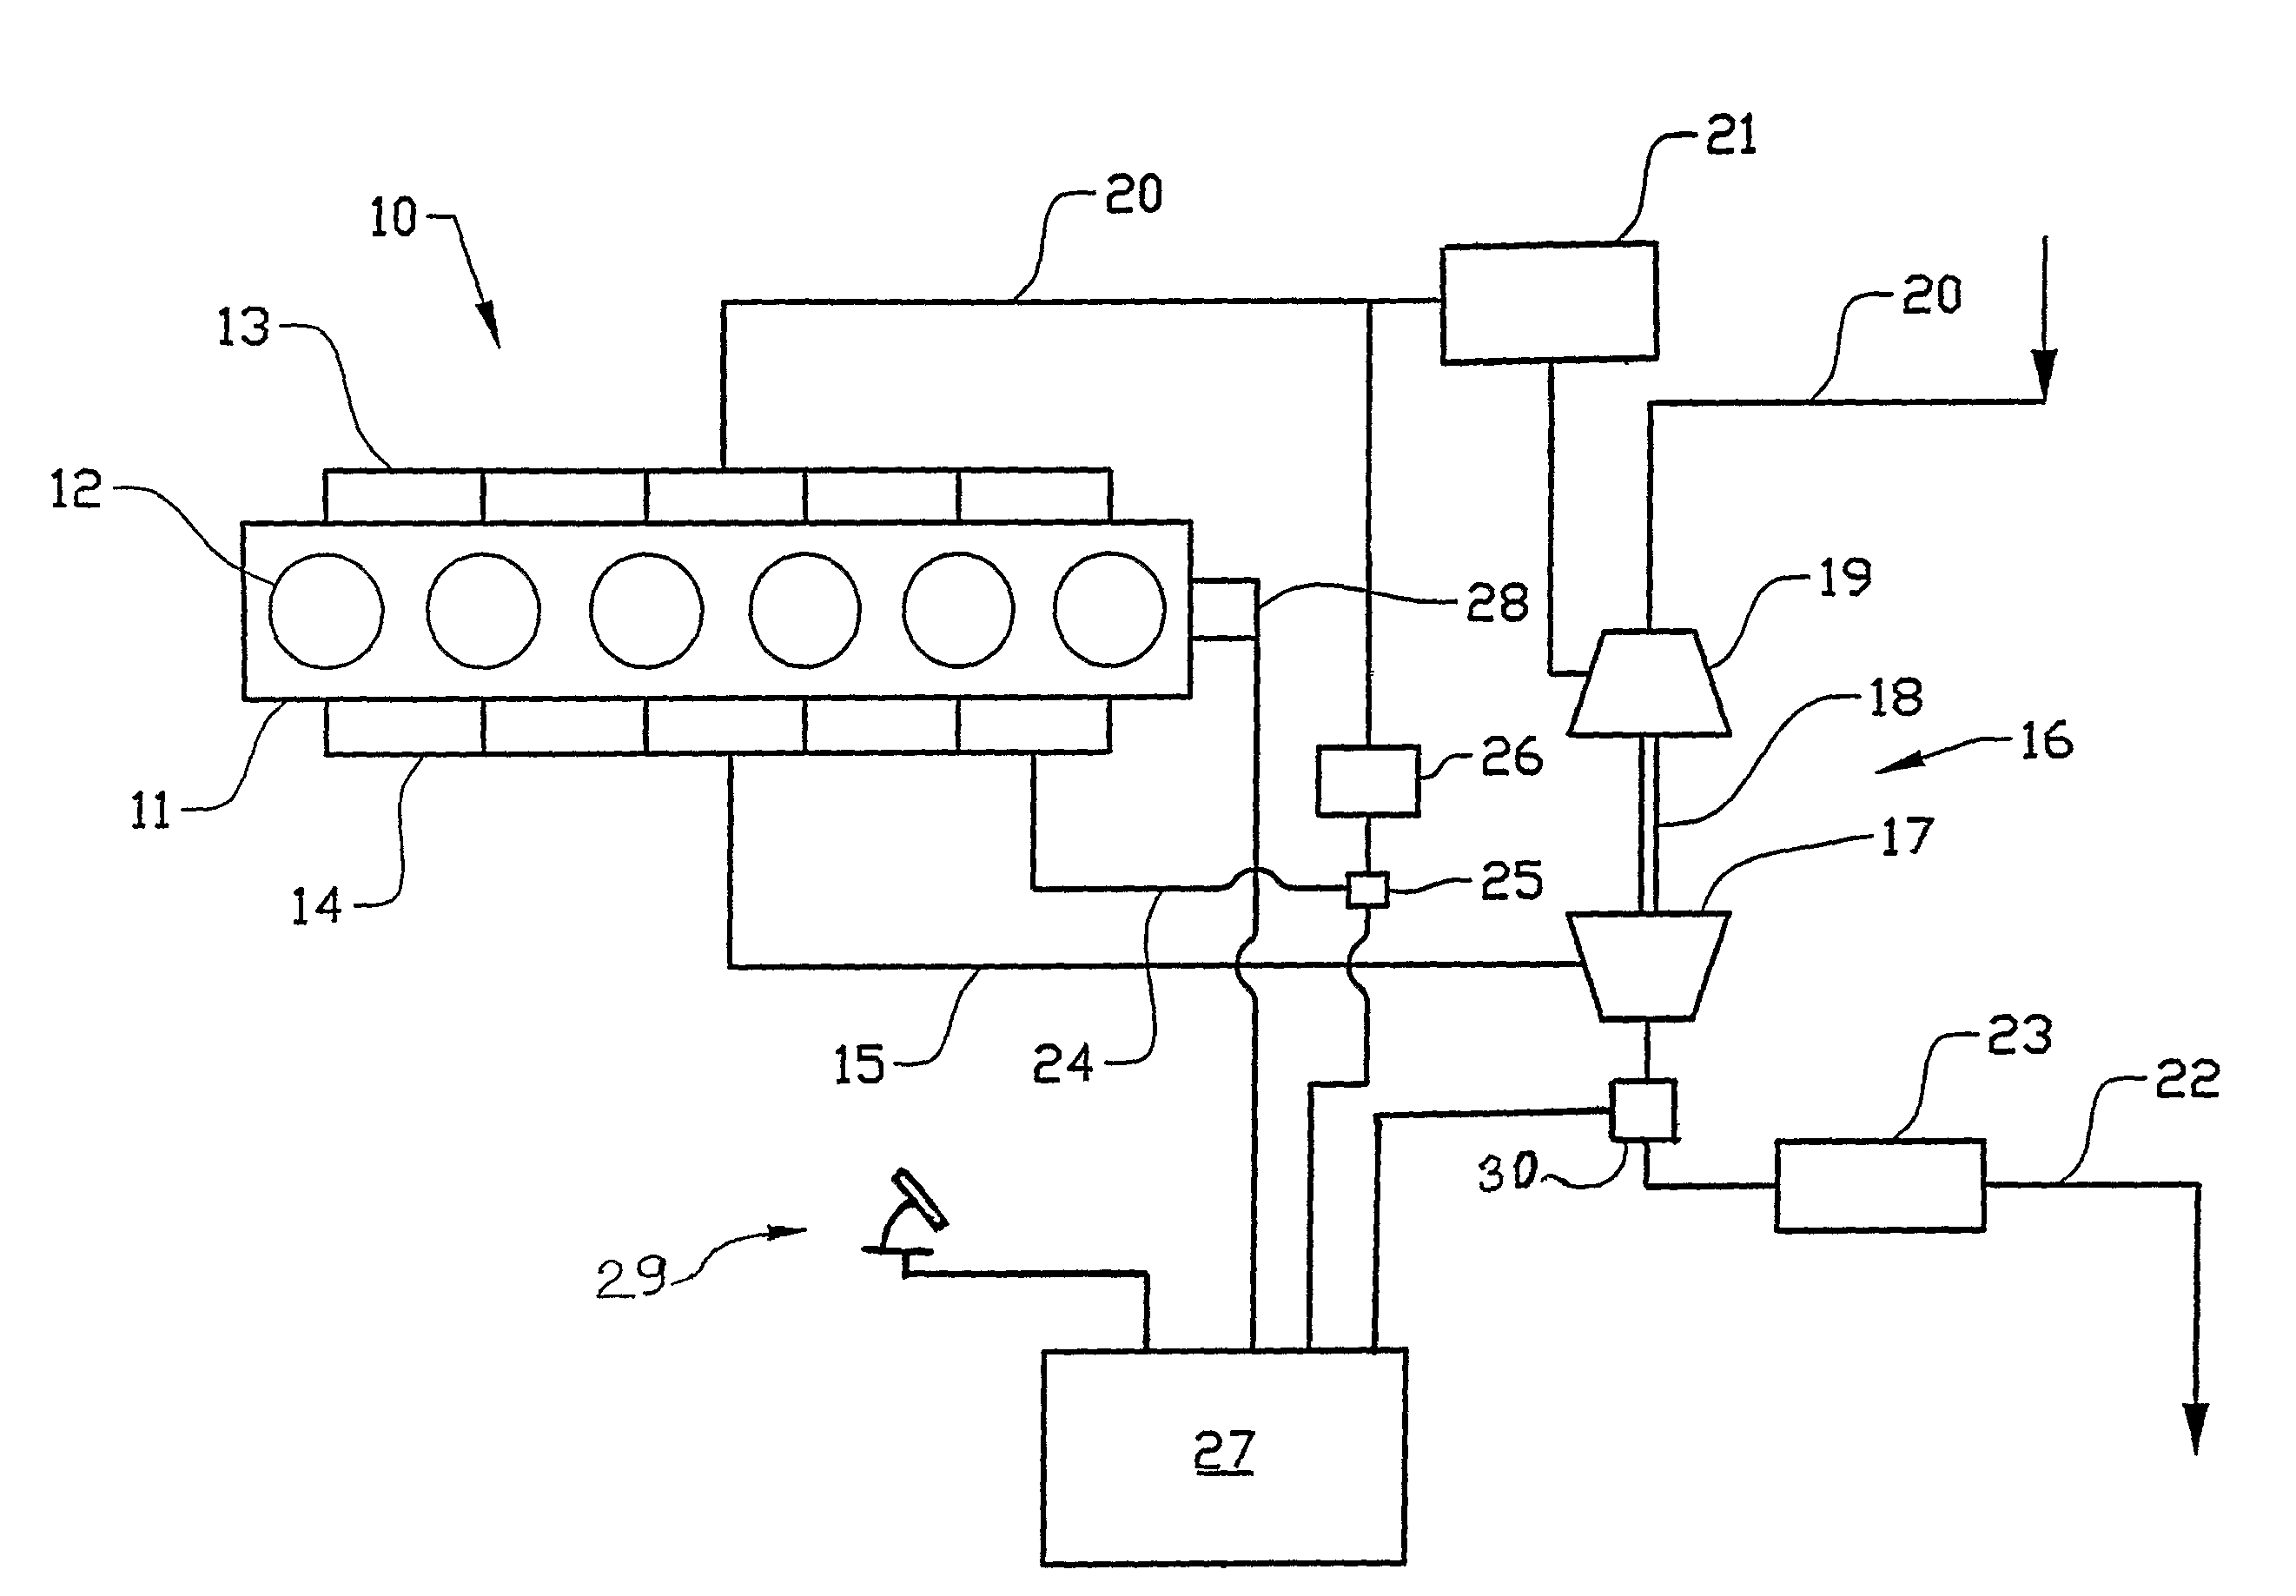 Method for internal combustion engine with exhaust recirculation